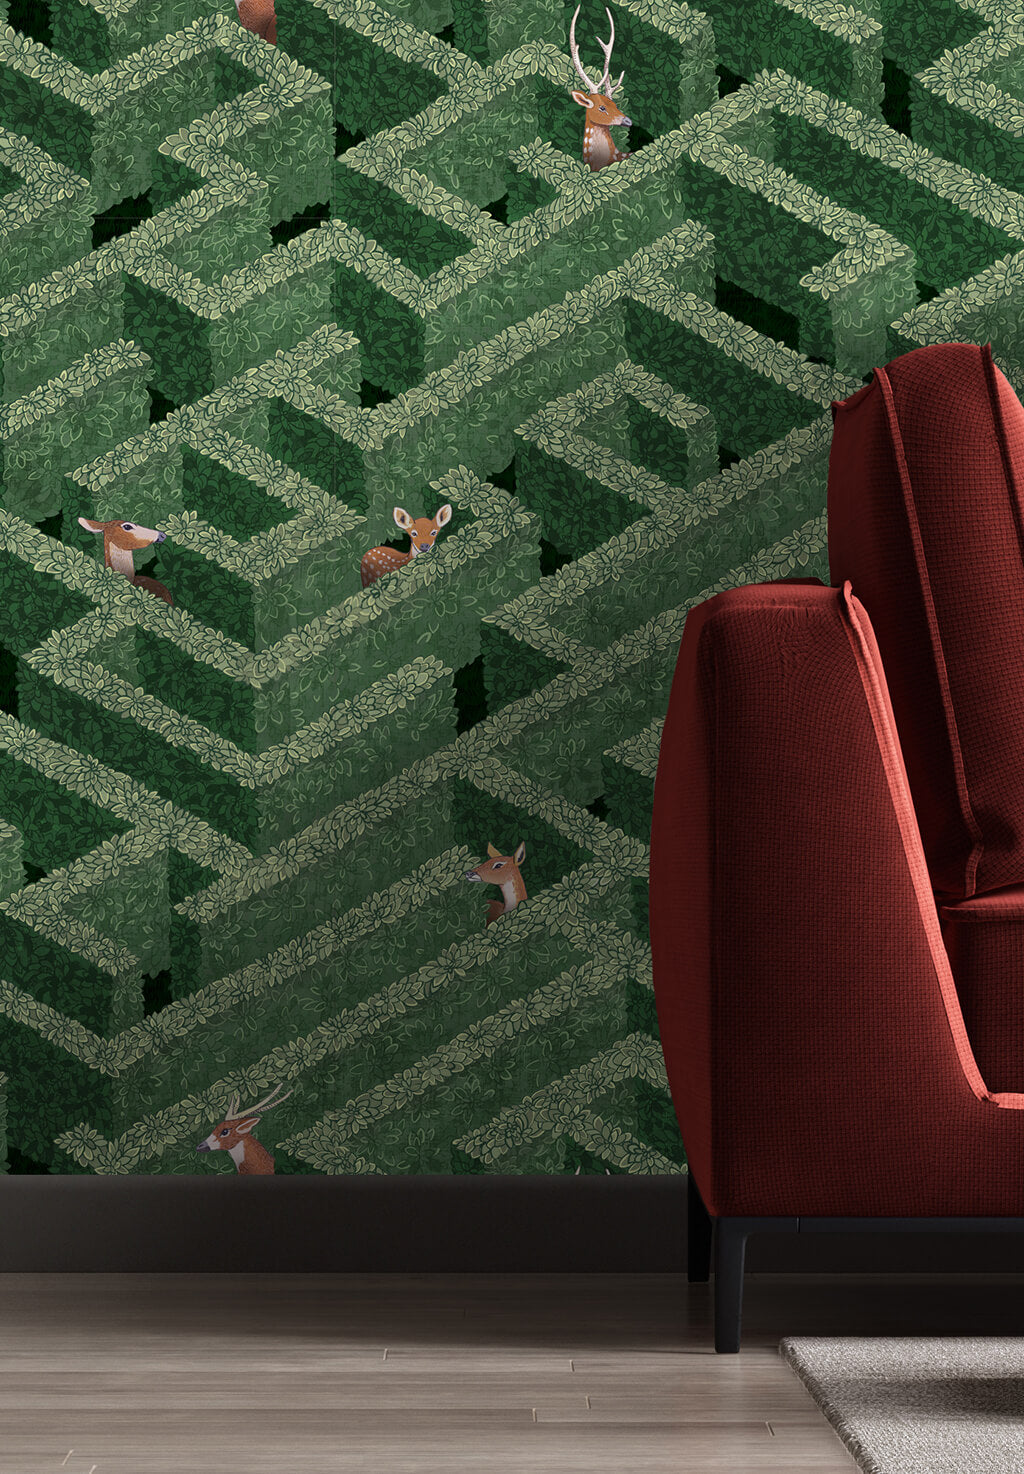 Labyrinth with Deer Room Wallpaper - Green